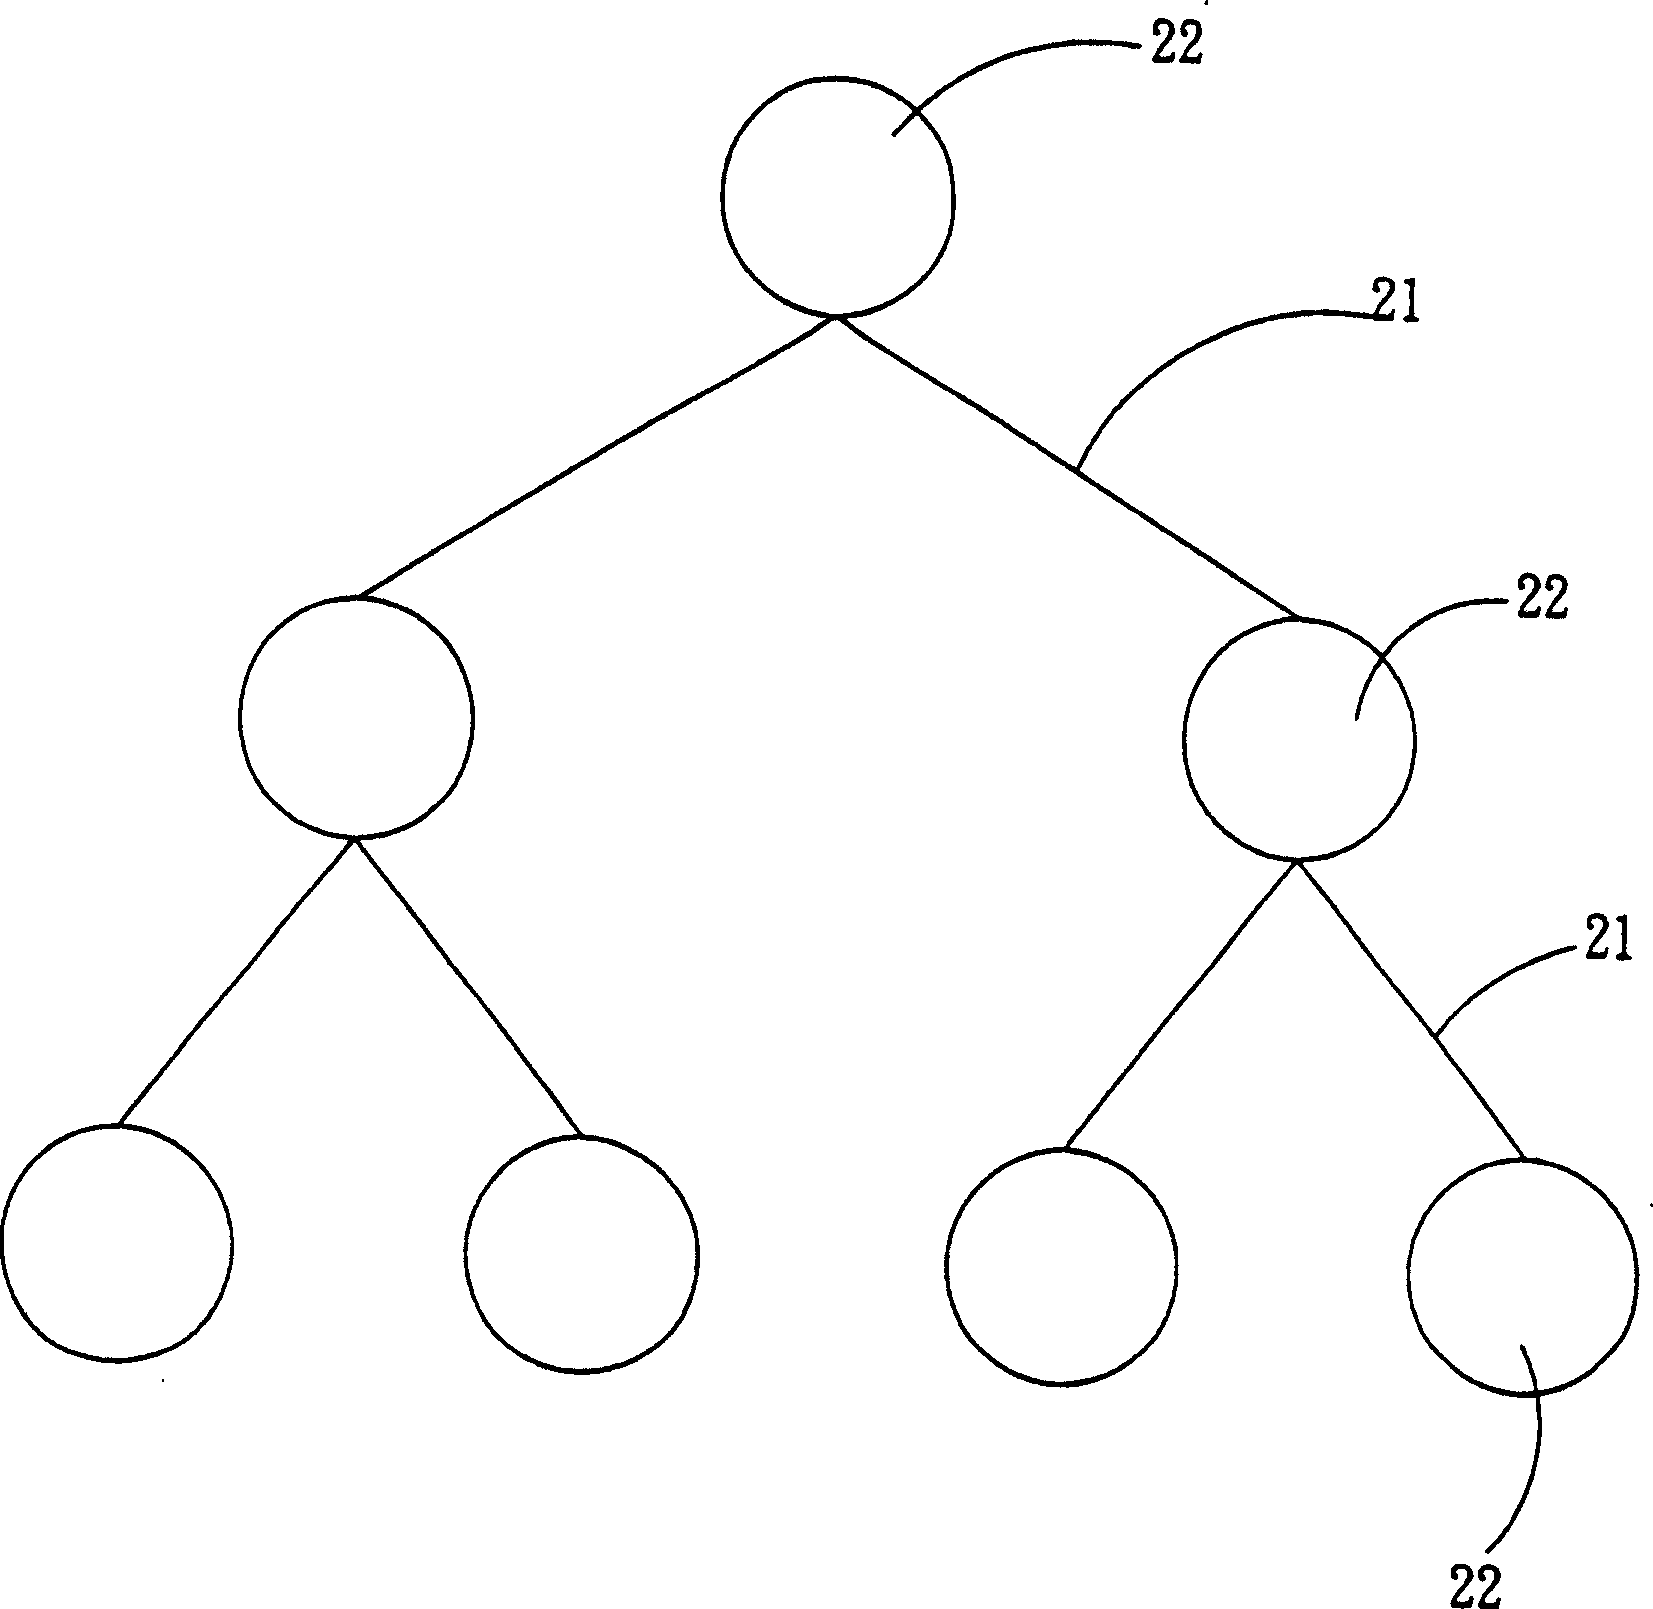 Work flow definition system and management system thereof